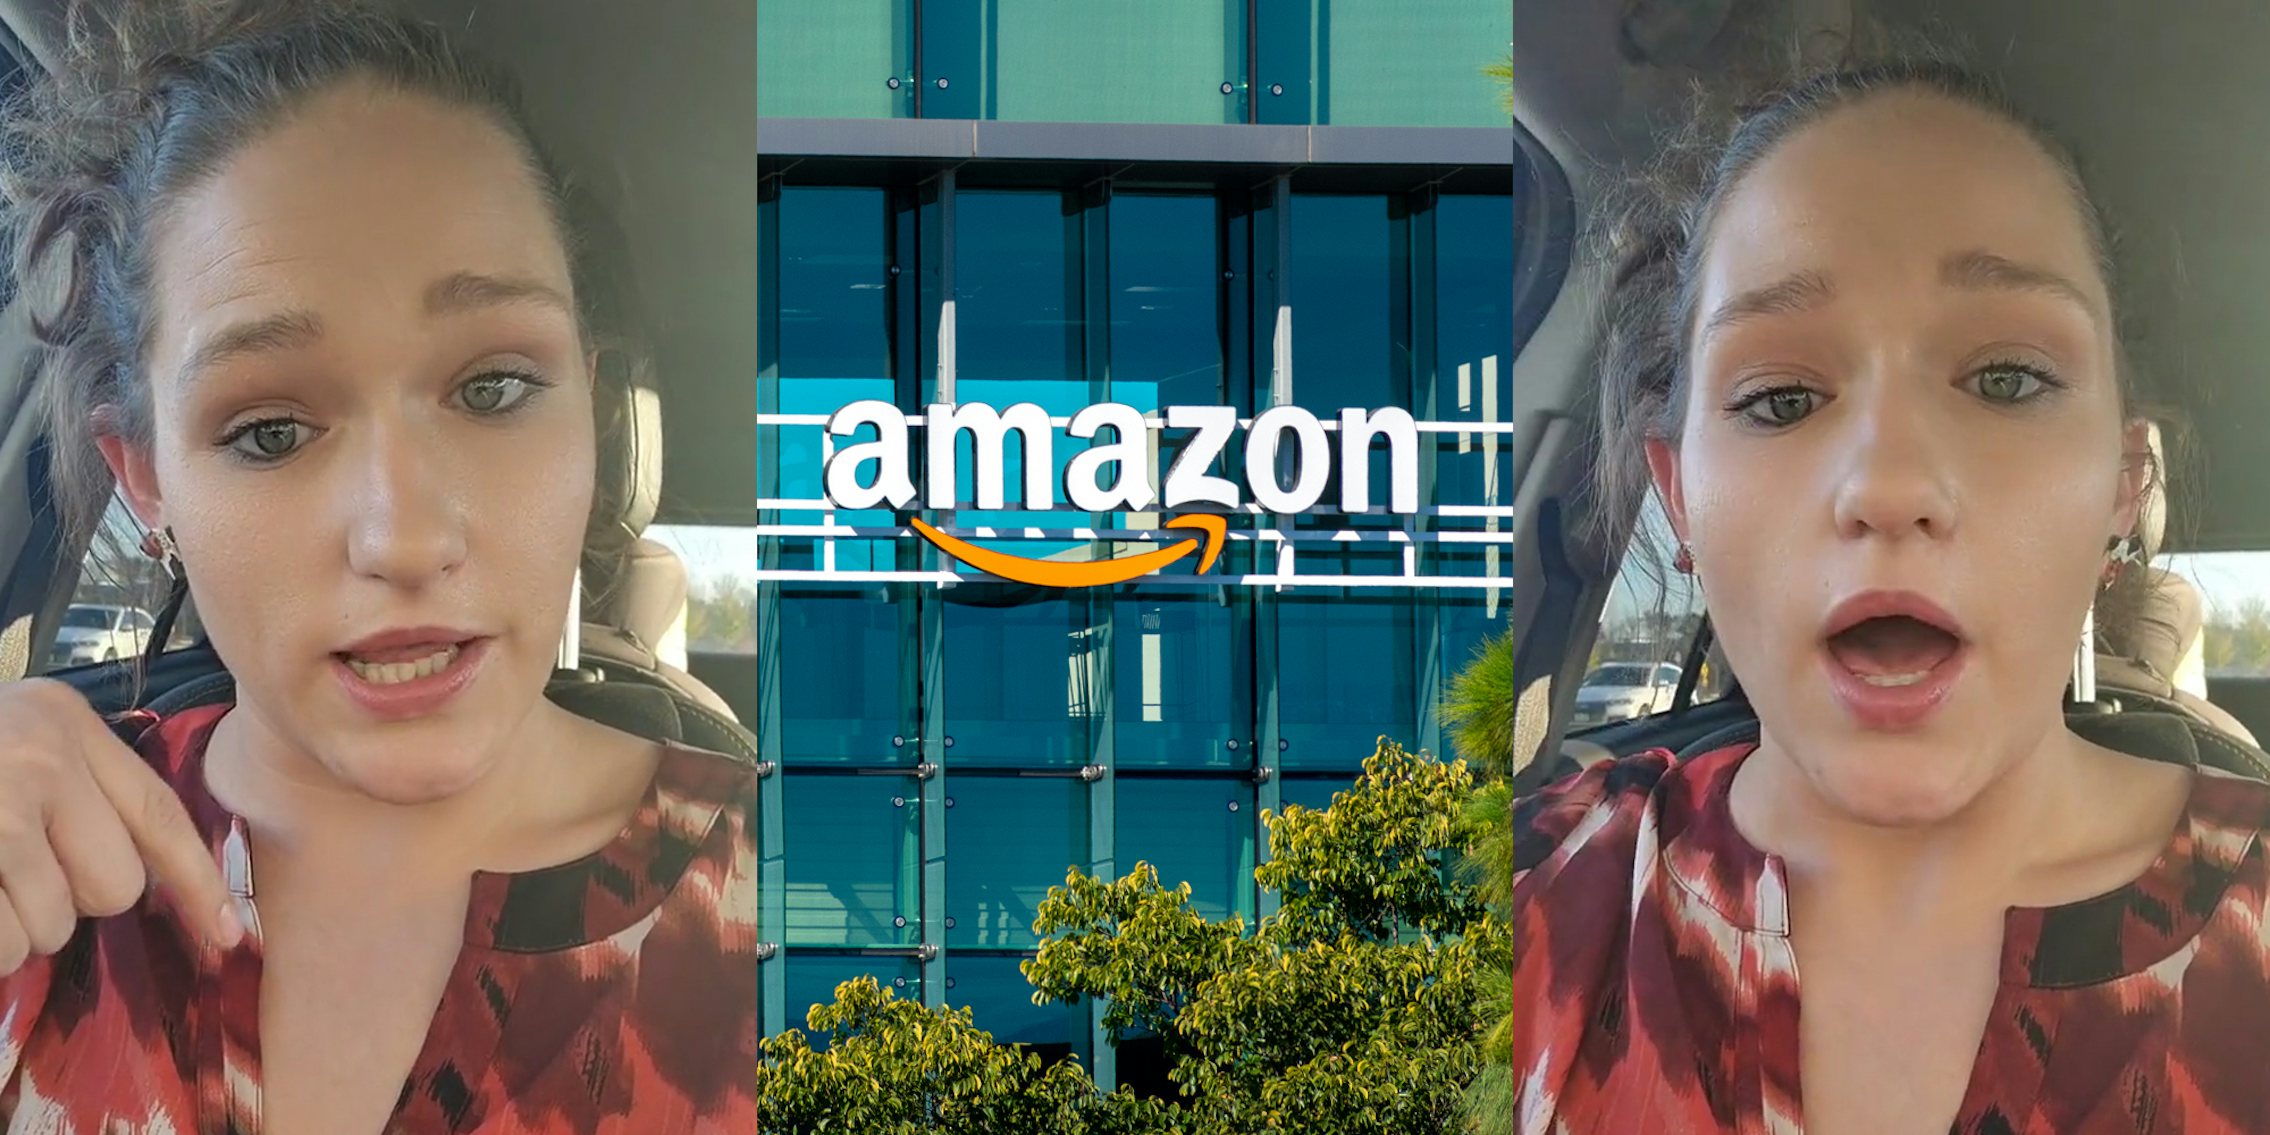 Former Amazon worker speaking in can pointing down (l) Amazon sign on building (c) Former Amazon worker speaking in car (r)